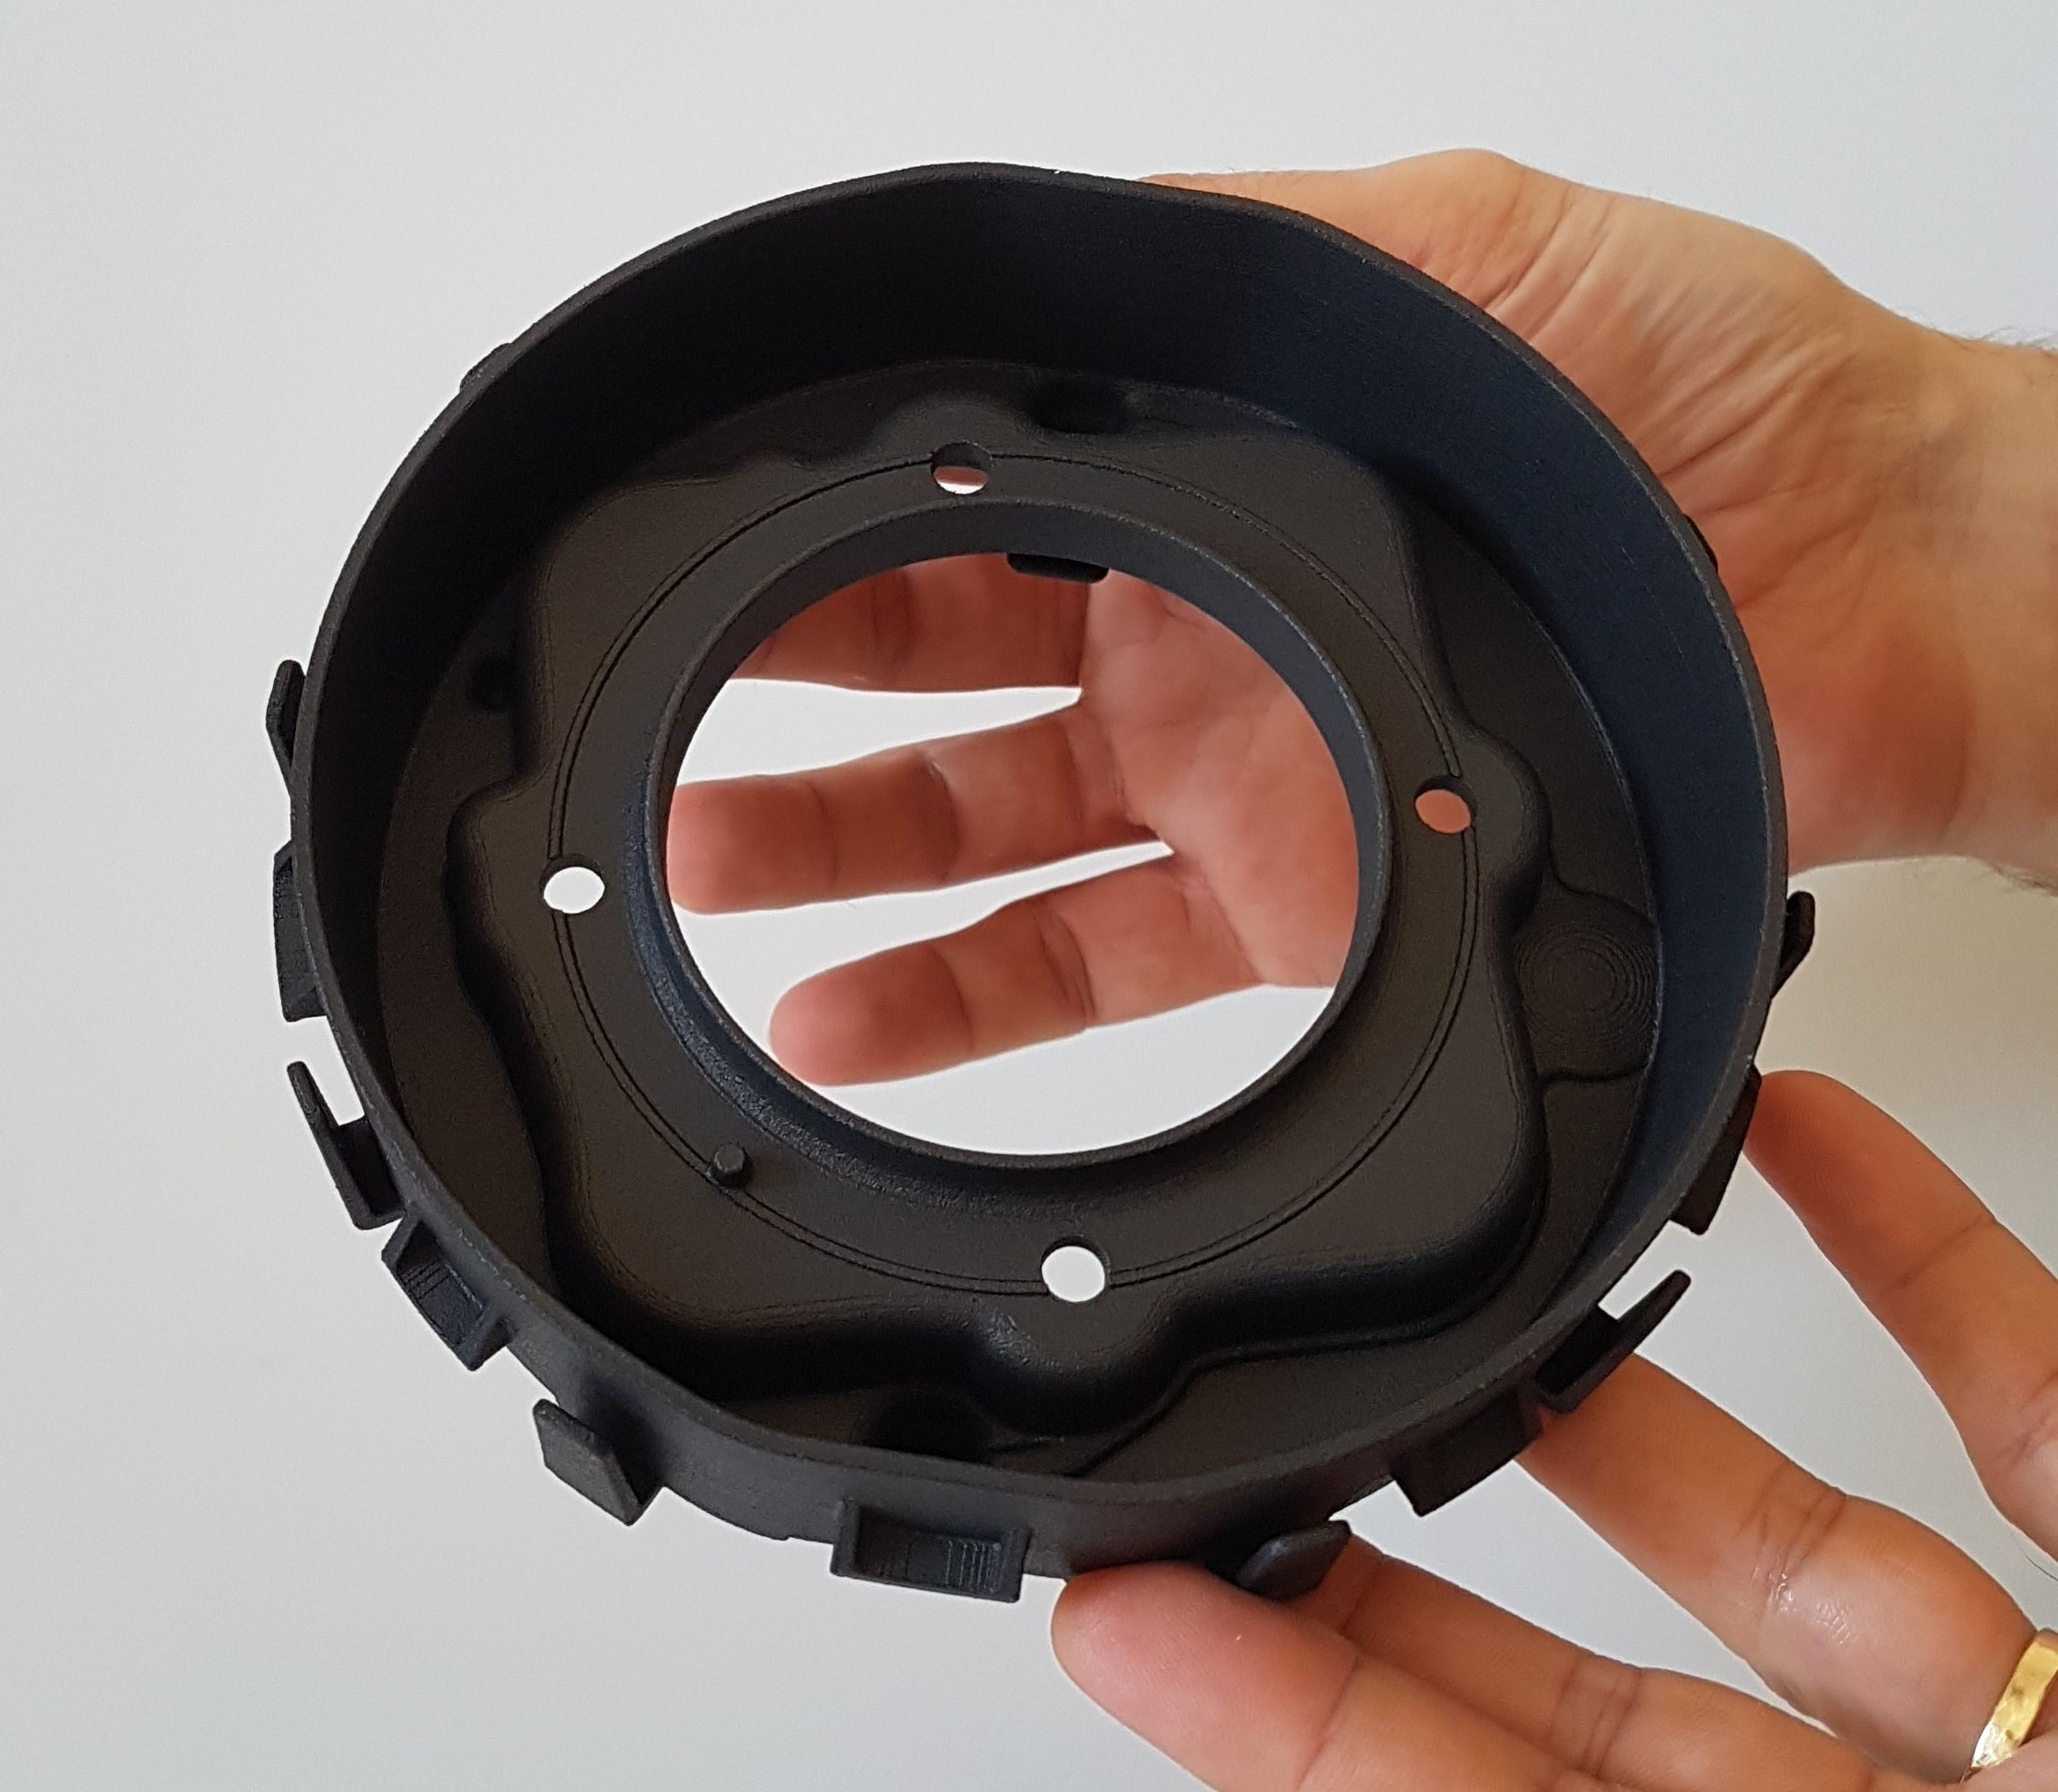 3D printed Driver Airbag (DAB) housing in Windform SP internal view. Photo via CRP.